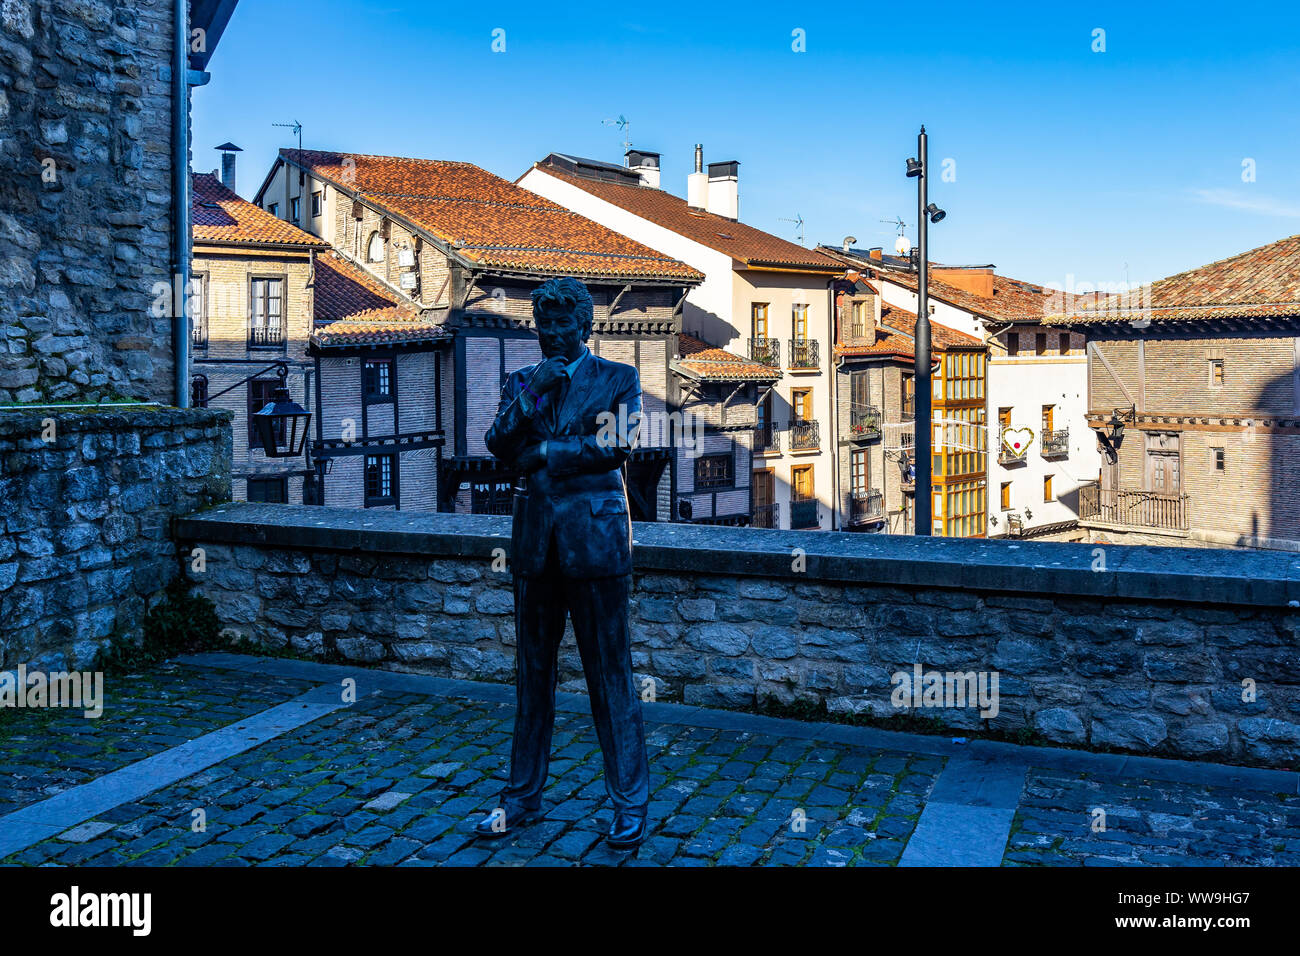 Ken Follet statue in Vitoria-Gasteiz, Spain. The famous British writer sets in Vitoria part of the bestseller novel “World Without End” Stock Photo